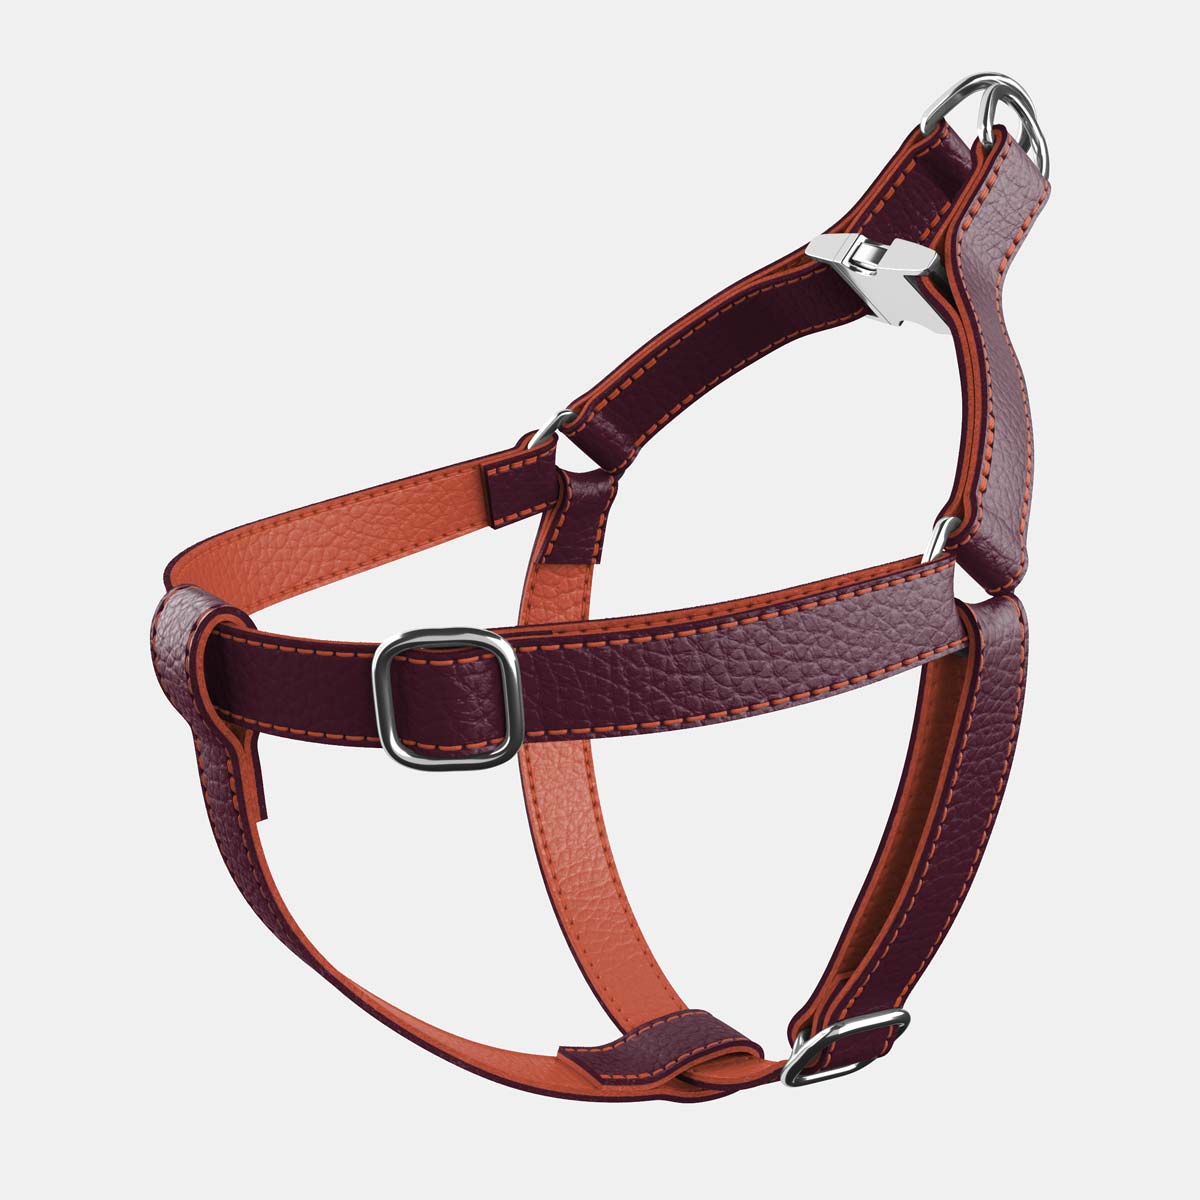 Leather Dog Harness - Dark Purple and Coral